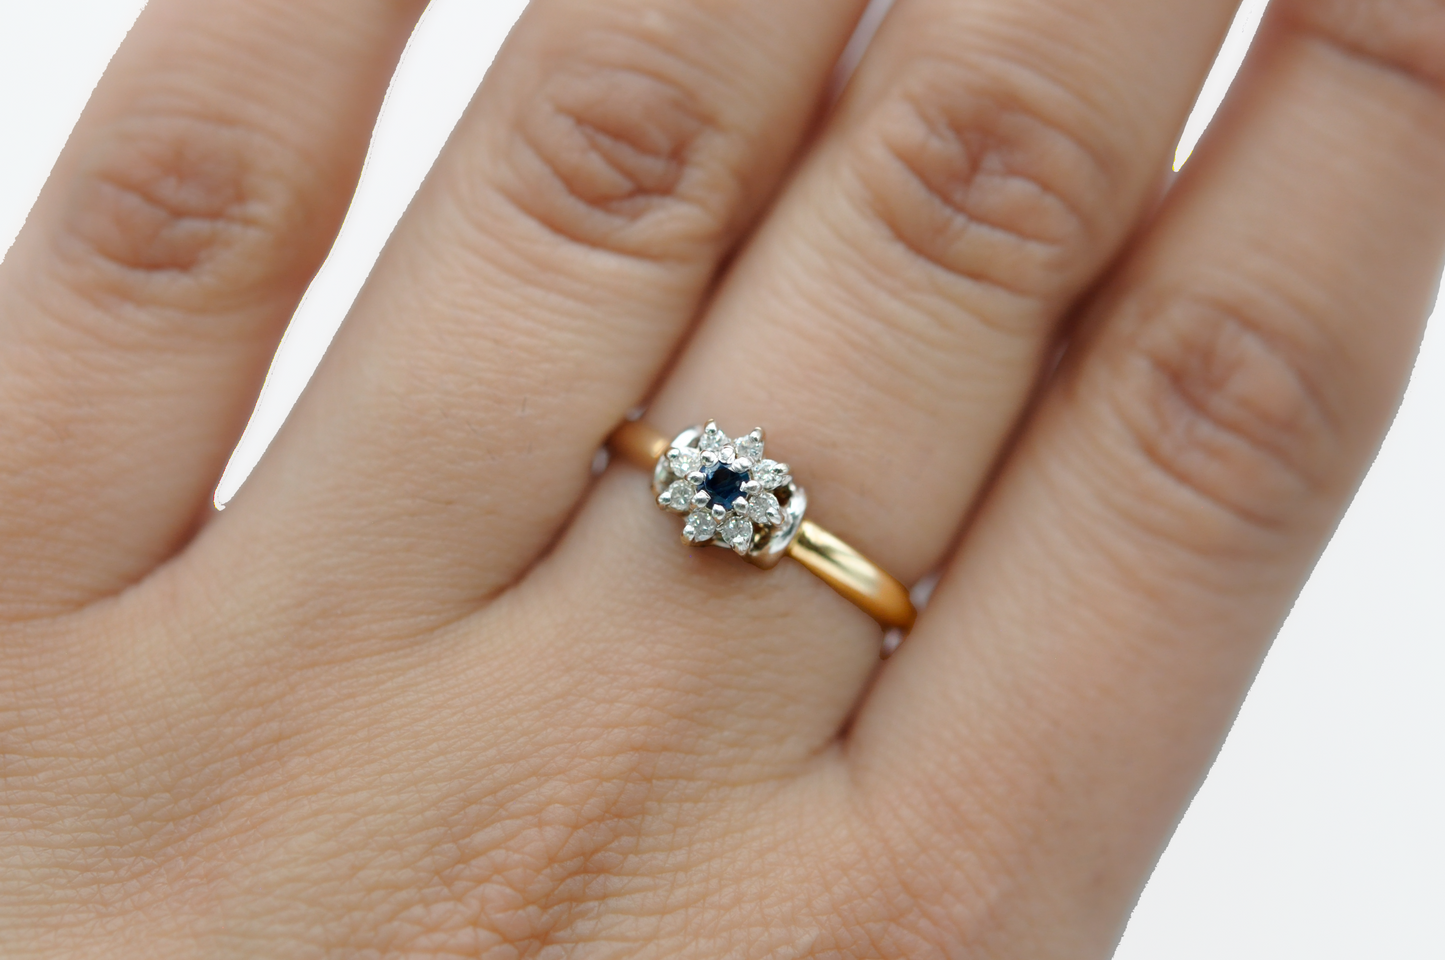 Yellow Gold Ring with Diamonds Surrounding a Blue Sapphire Center Stone